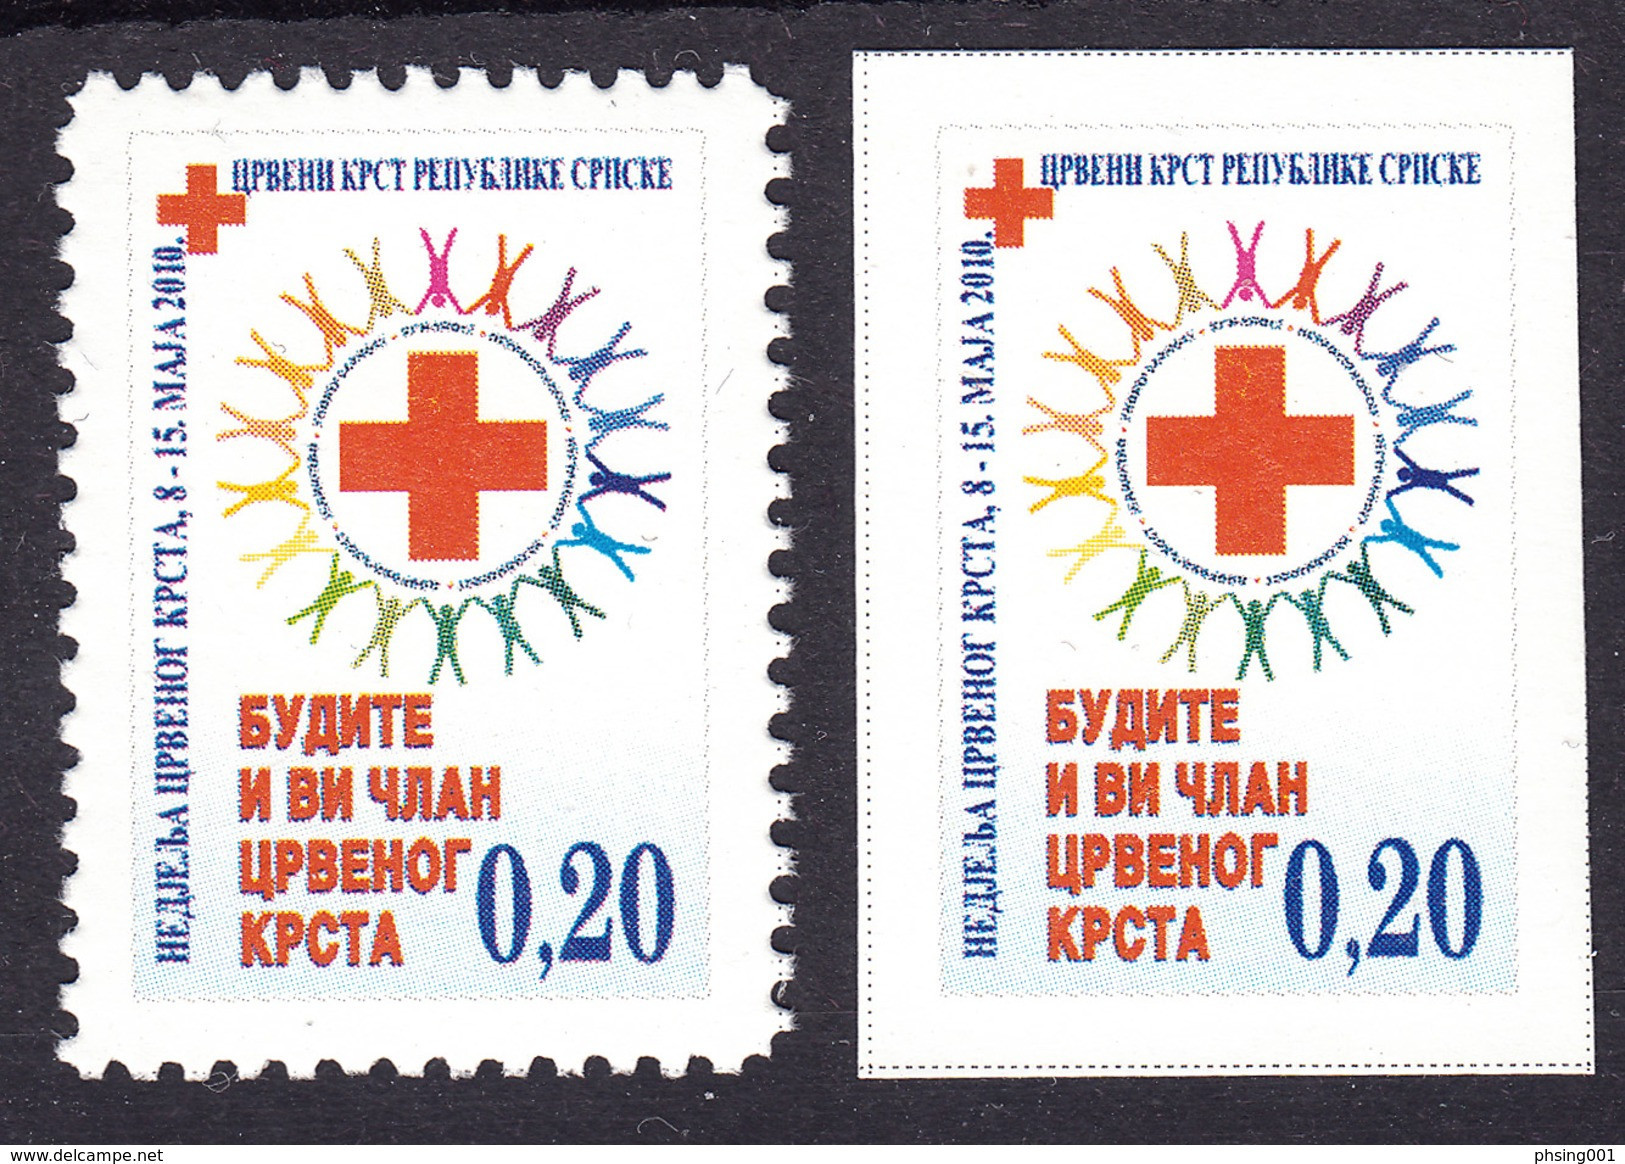 Bosnia Serbia 2010 Red Cross Rotes Kreuz Croix Rouge, Perforated + Imperforated, Tax, Charity, Surcharge Stamps MNH - Bosnia And Herzegovina